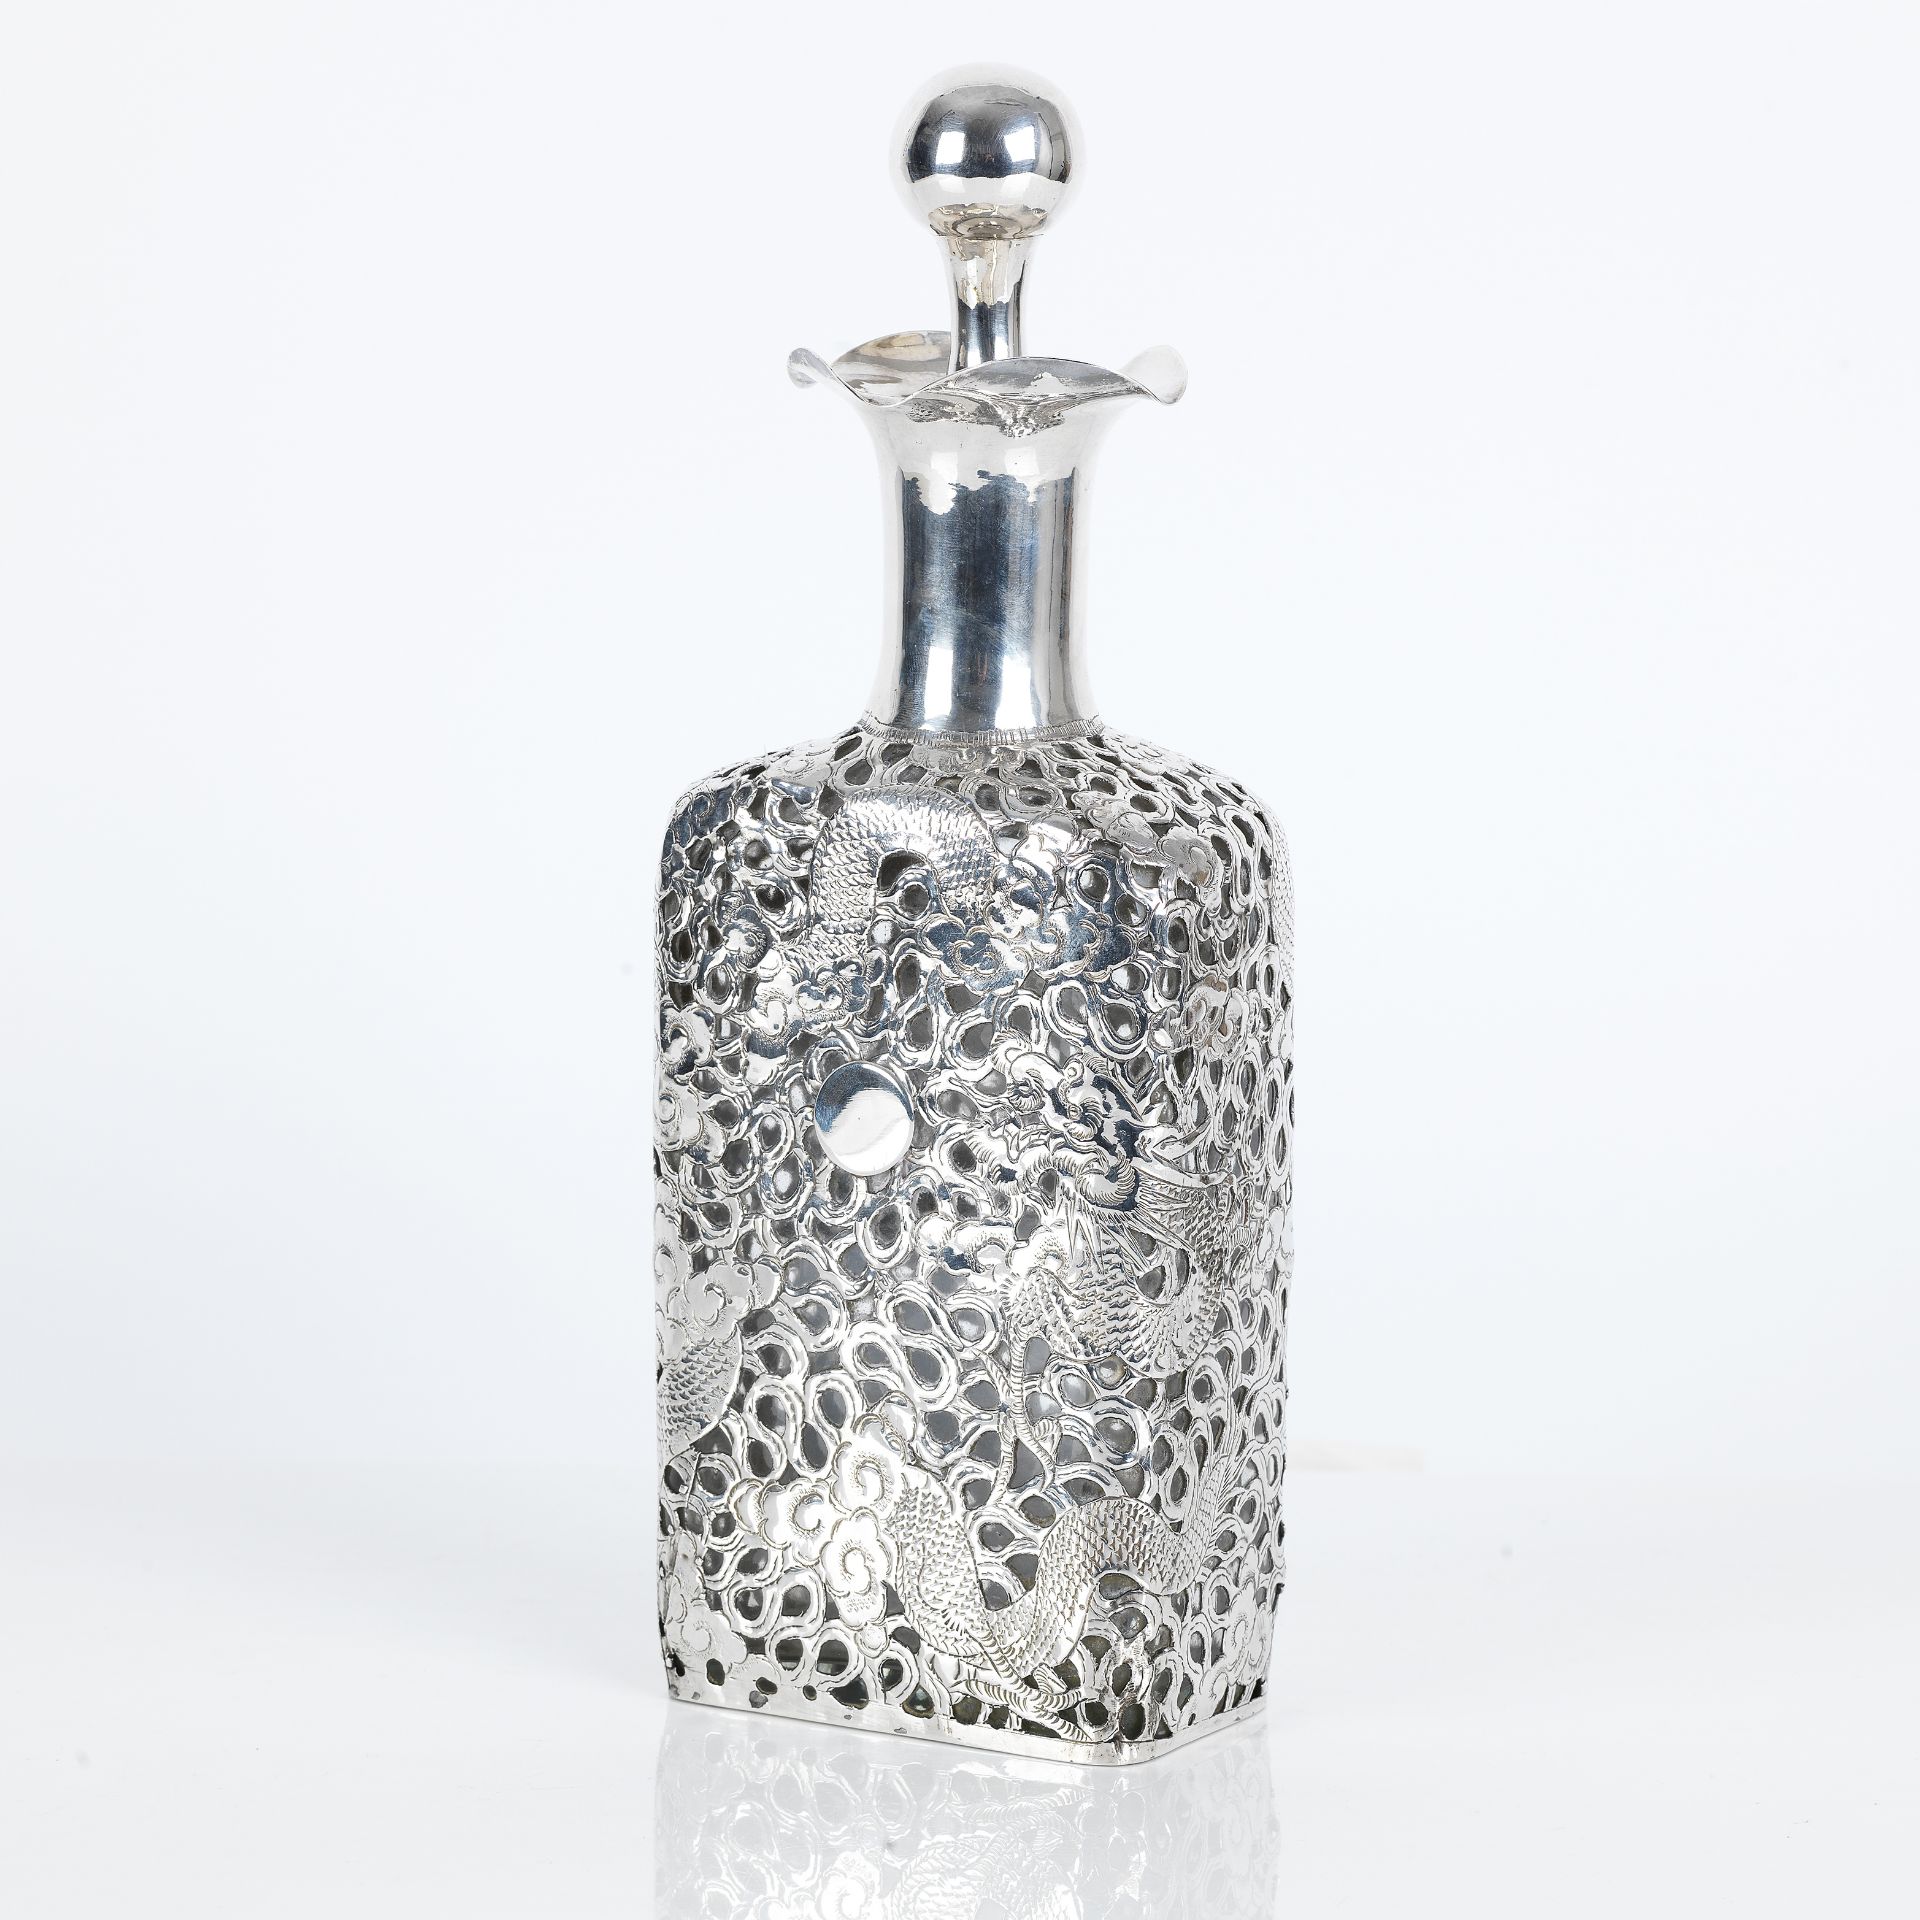 A Chinese Export Silver-mounted decanter impressed marks for Wai Kee of Hong Kong